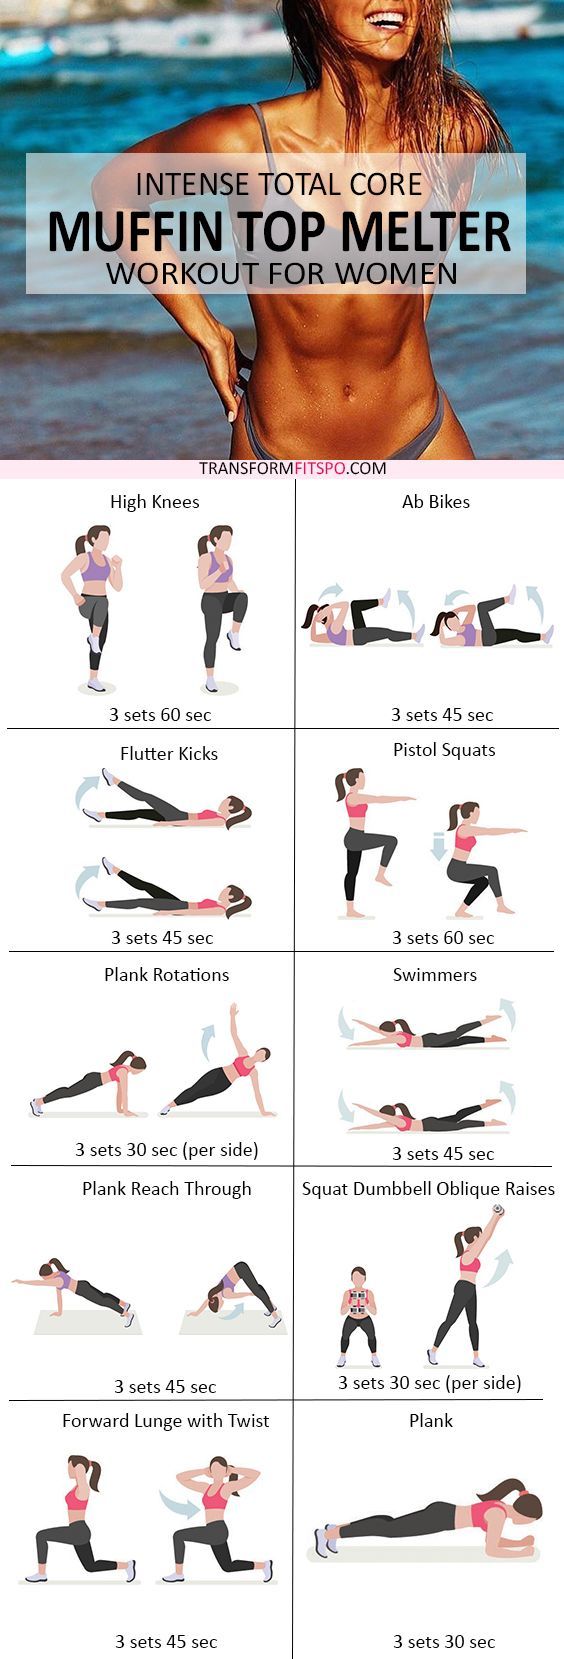 Repin and share if this workout got you in shape FAST! Read the post for the exercise descriptions.